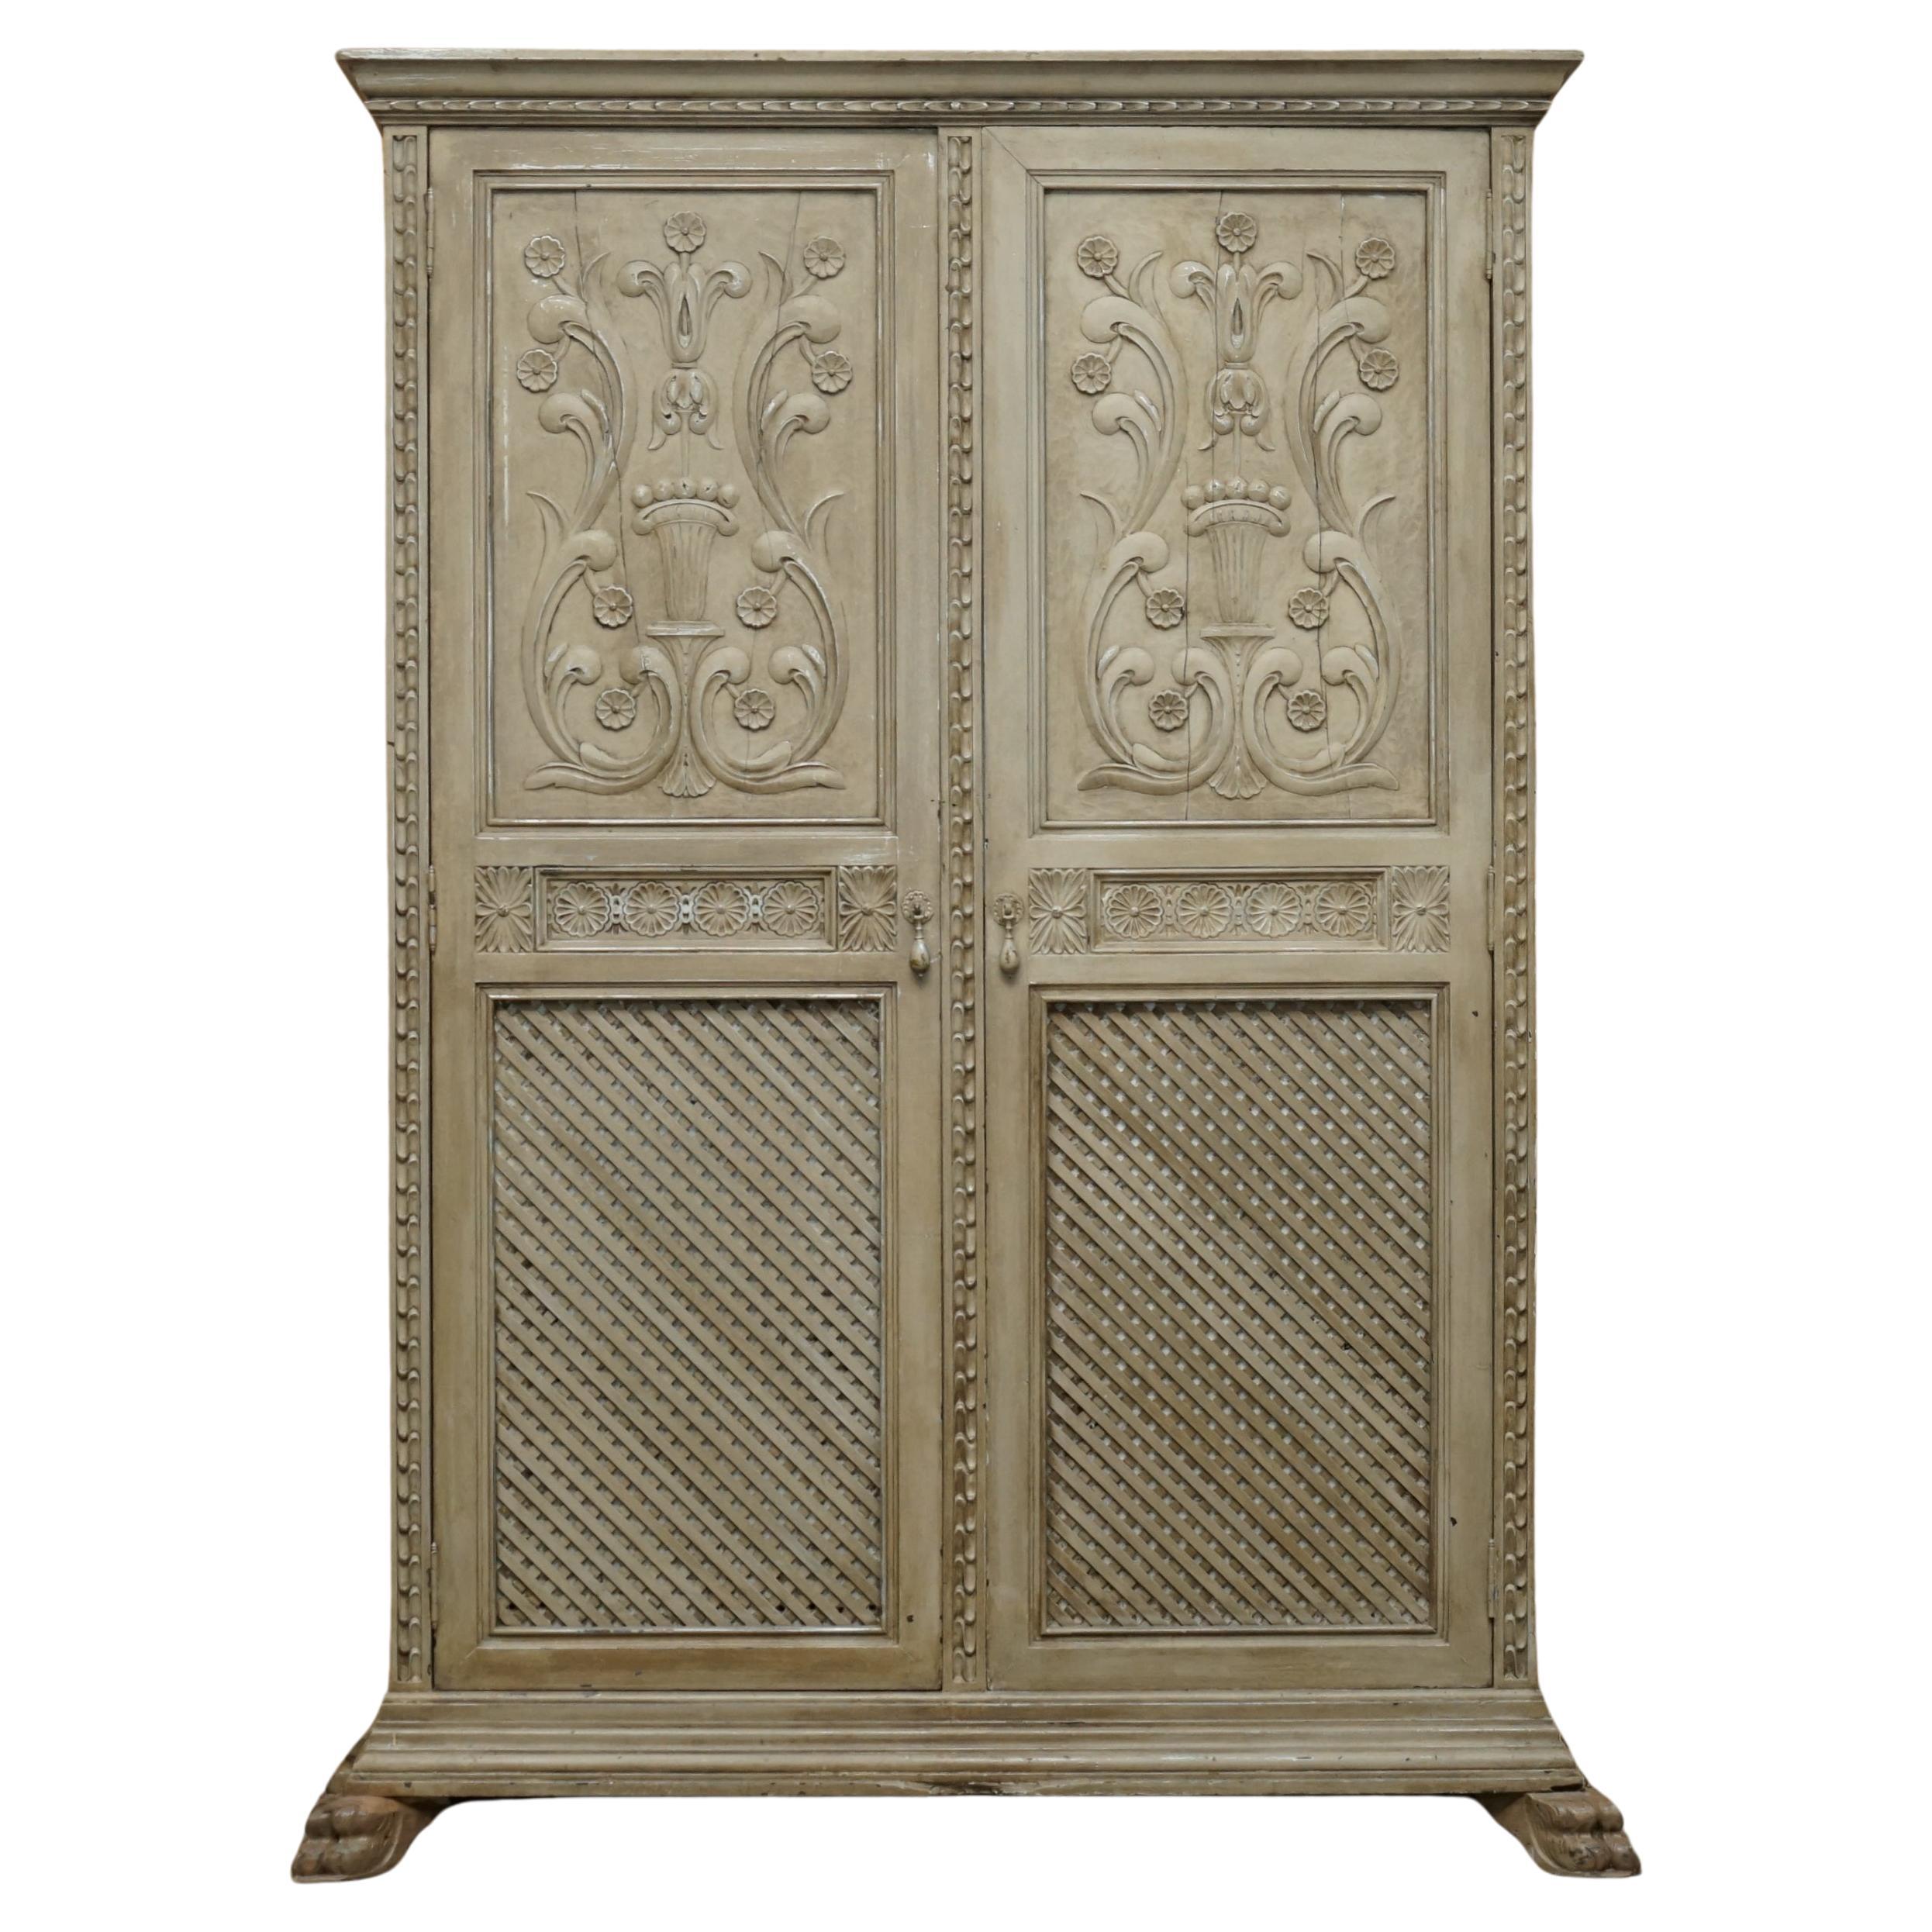 ANTIQUE JACOBEAN REVIVAL HAND CARVED ARMOIRE WARDROBE WiTH GREY FRENCH PAINT For Sale